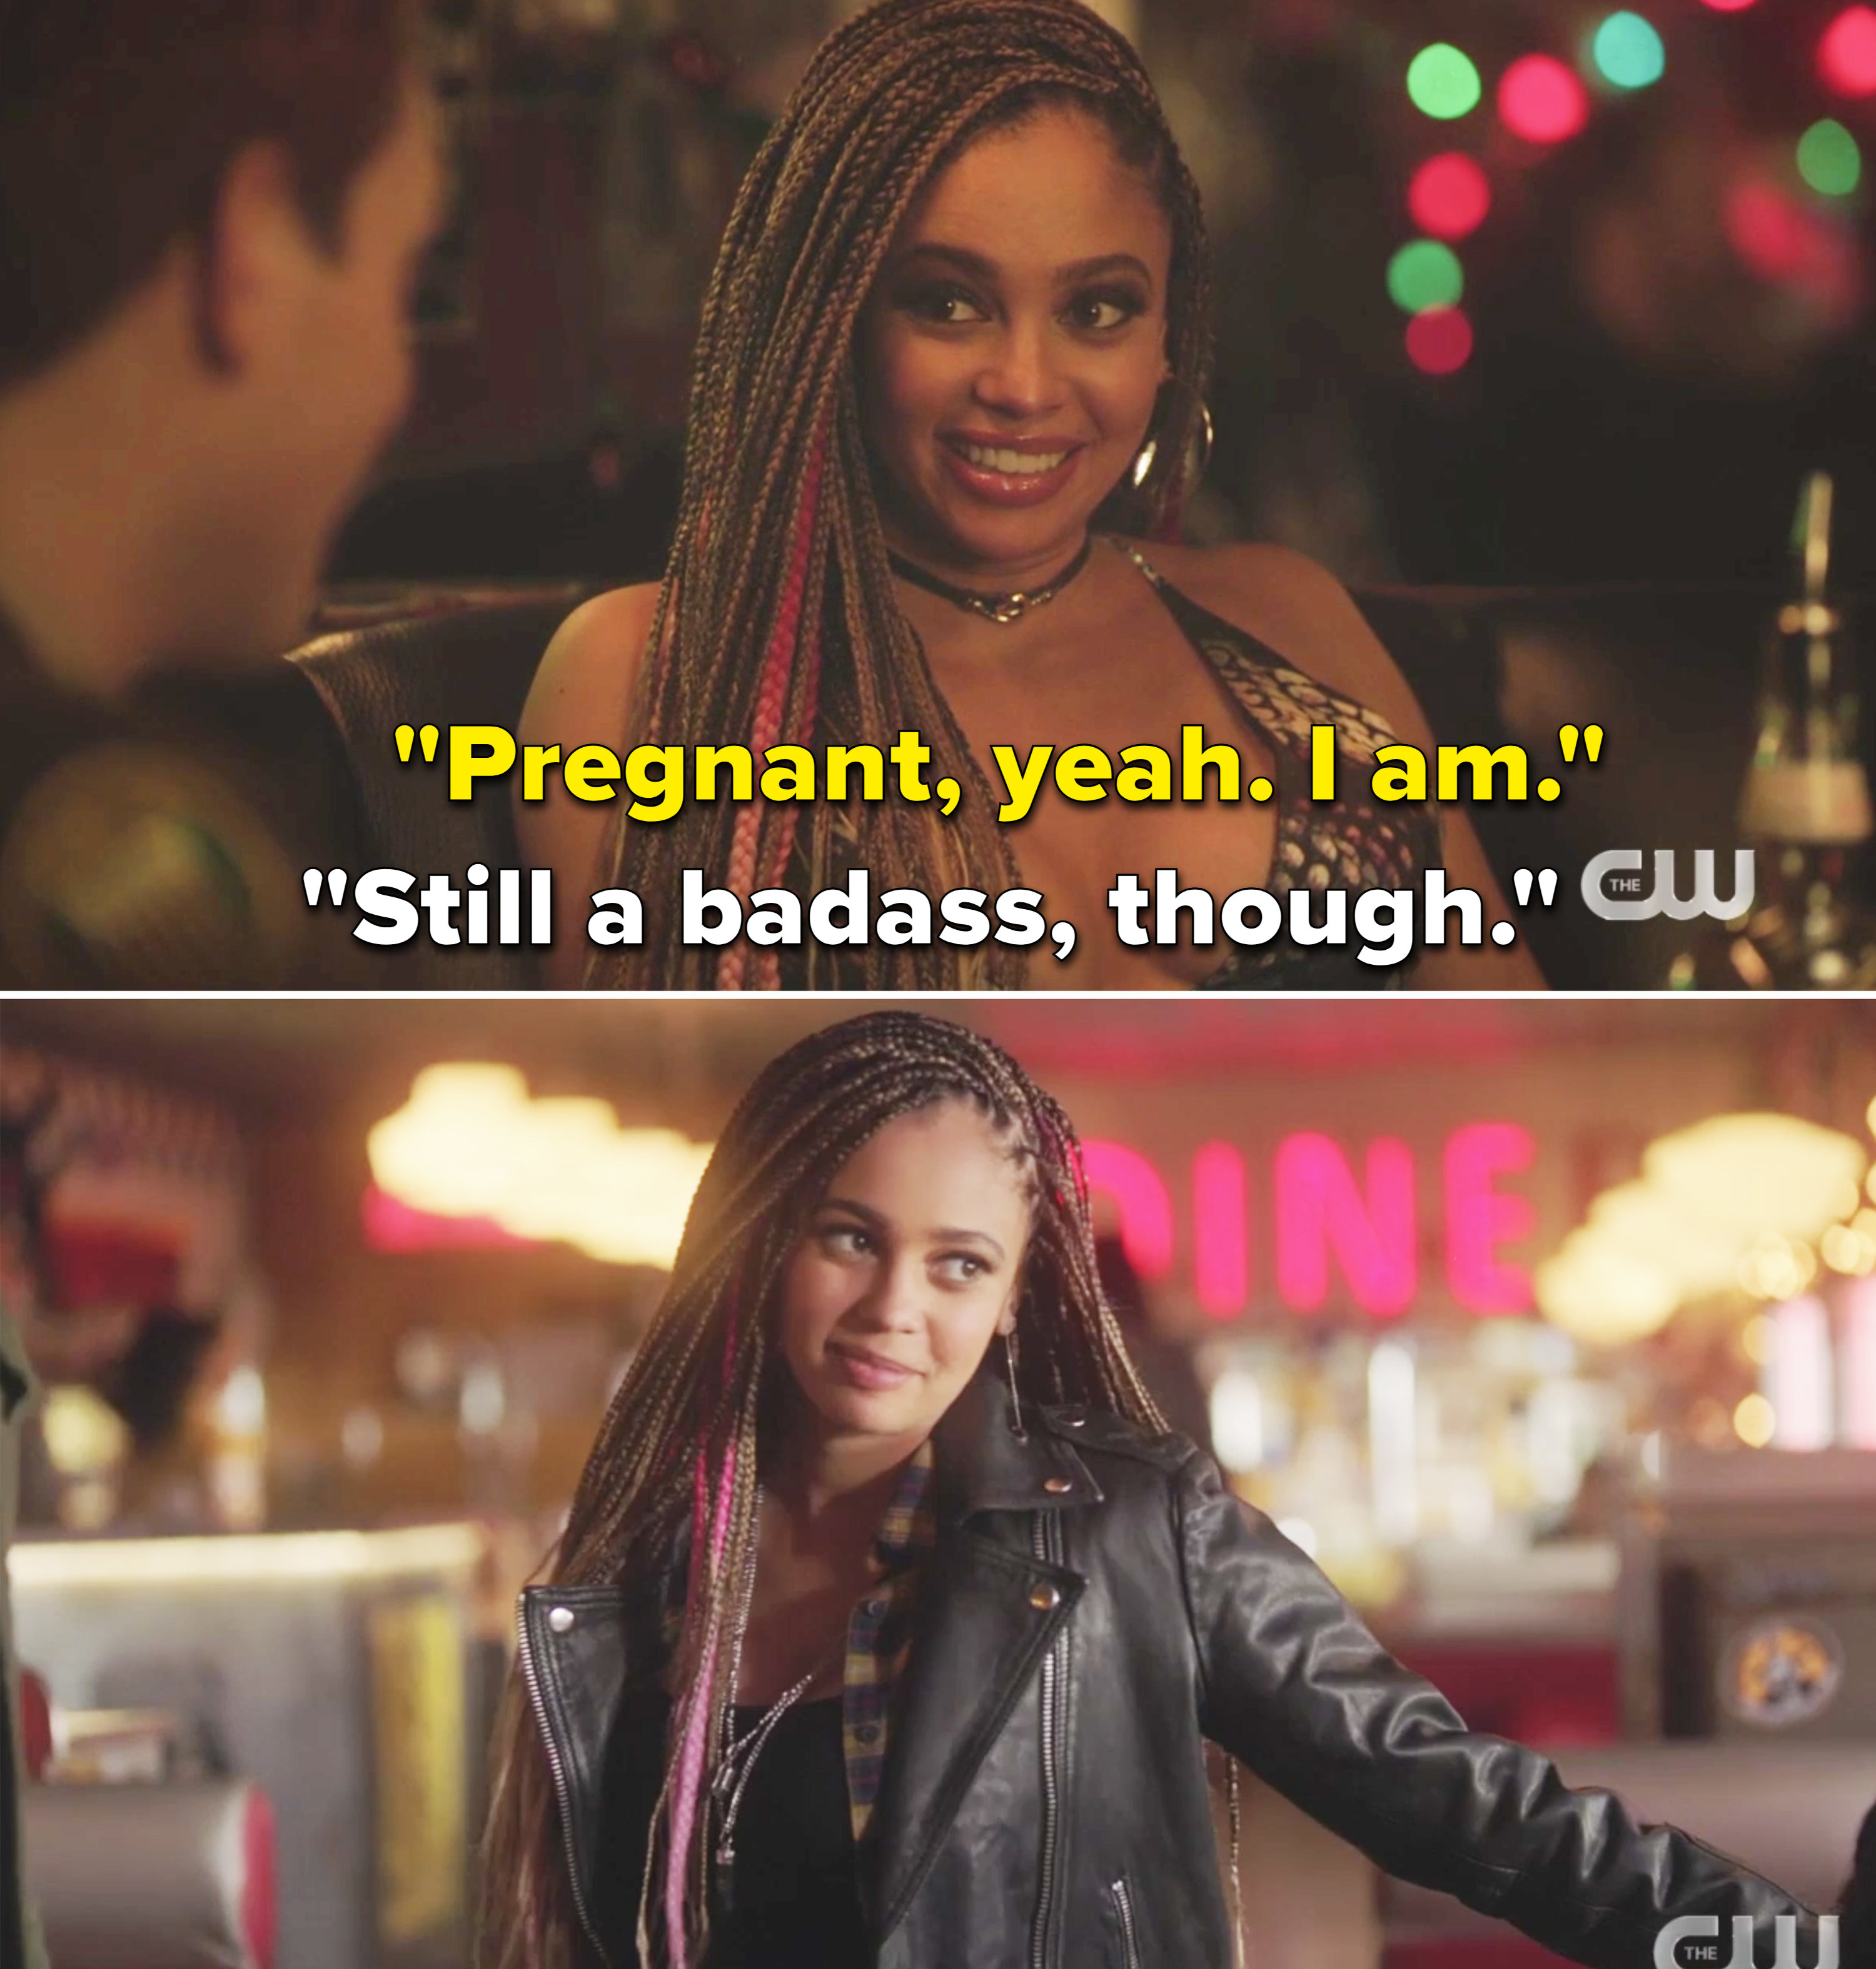 Toni telling Archie, &quot;Pregnant, yeah. I am&quot; and Archie saying, &quot;Still a badass though&quot;